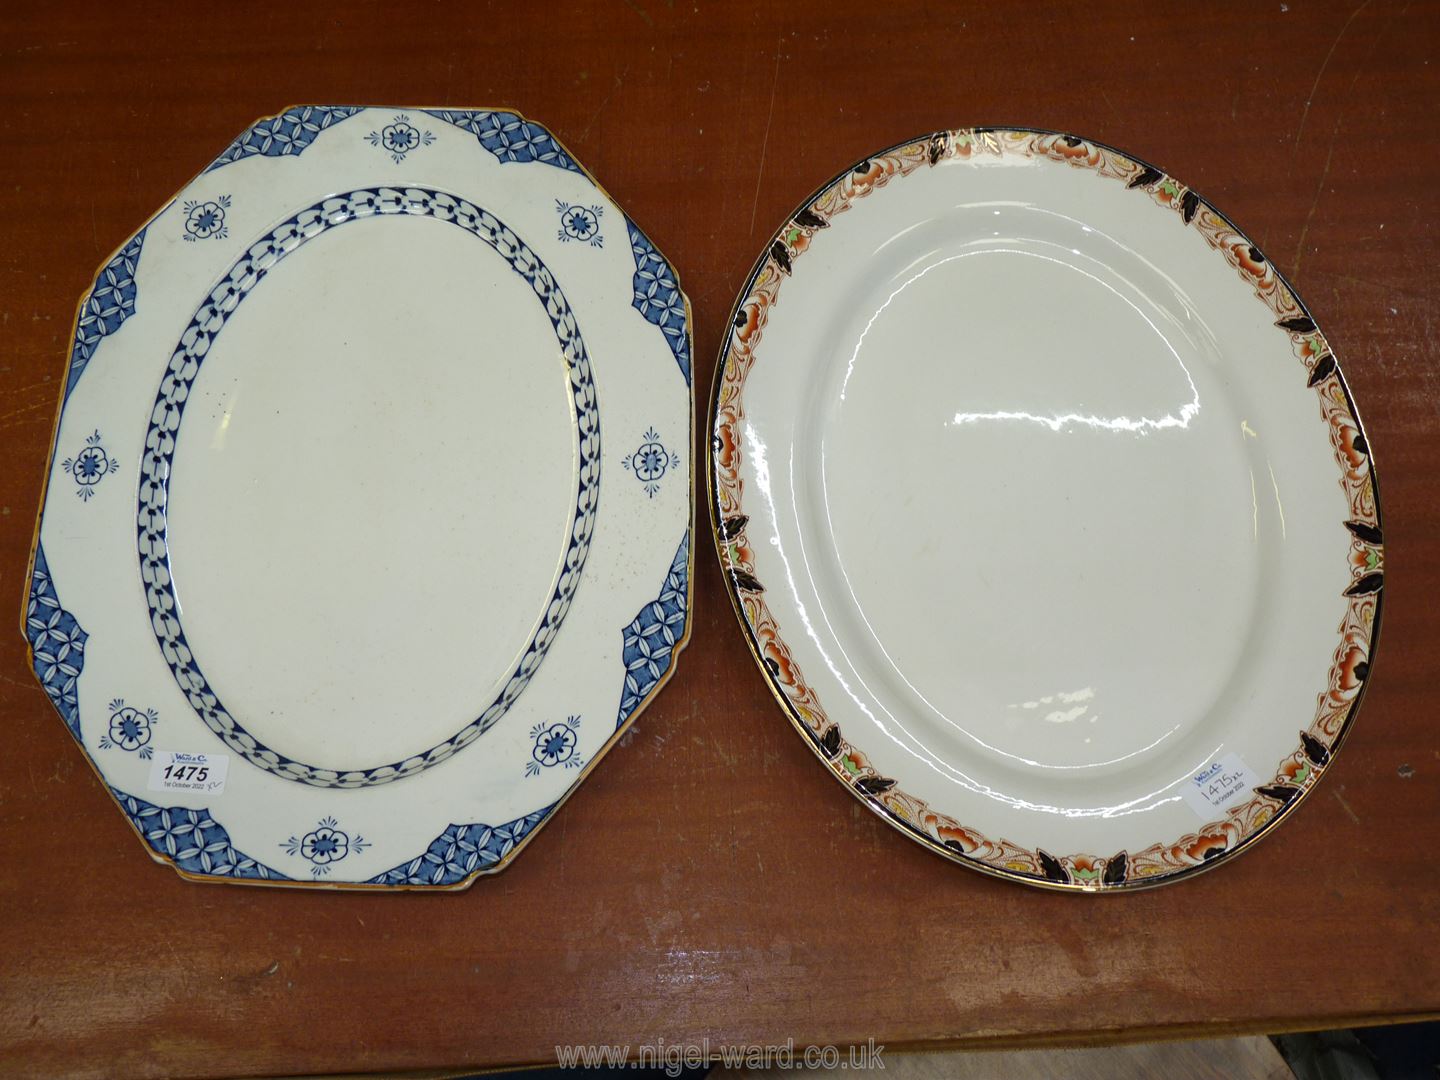 Two large meat plates, one Burslem Bristol and one blue and white 'Blue Bombay' Wood & Sons.